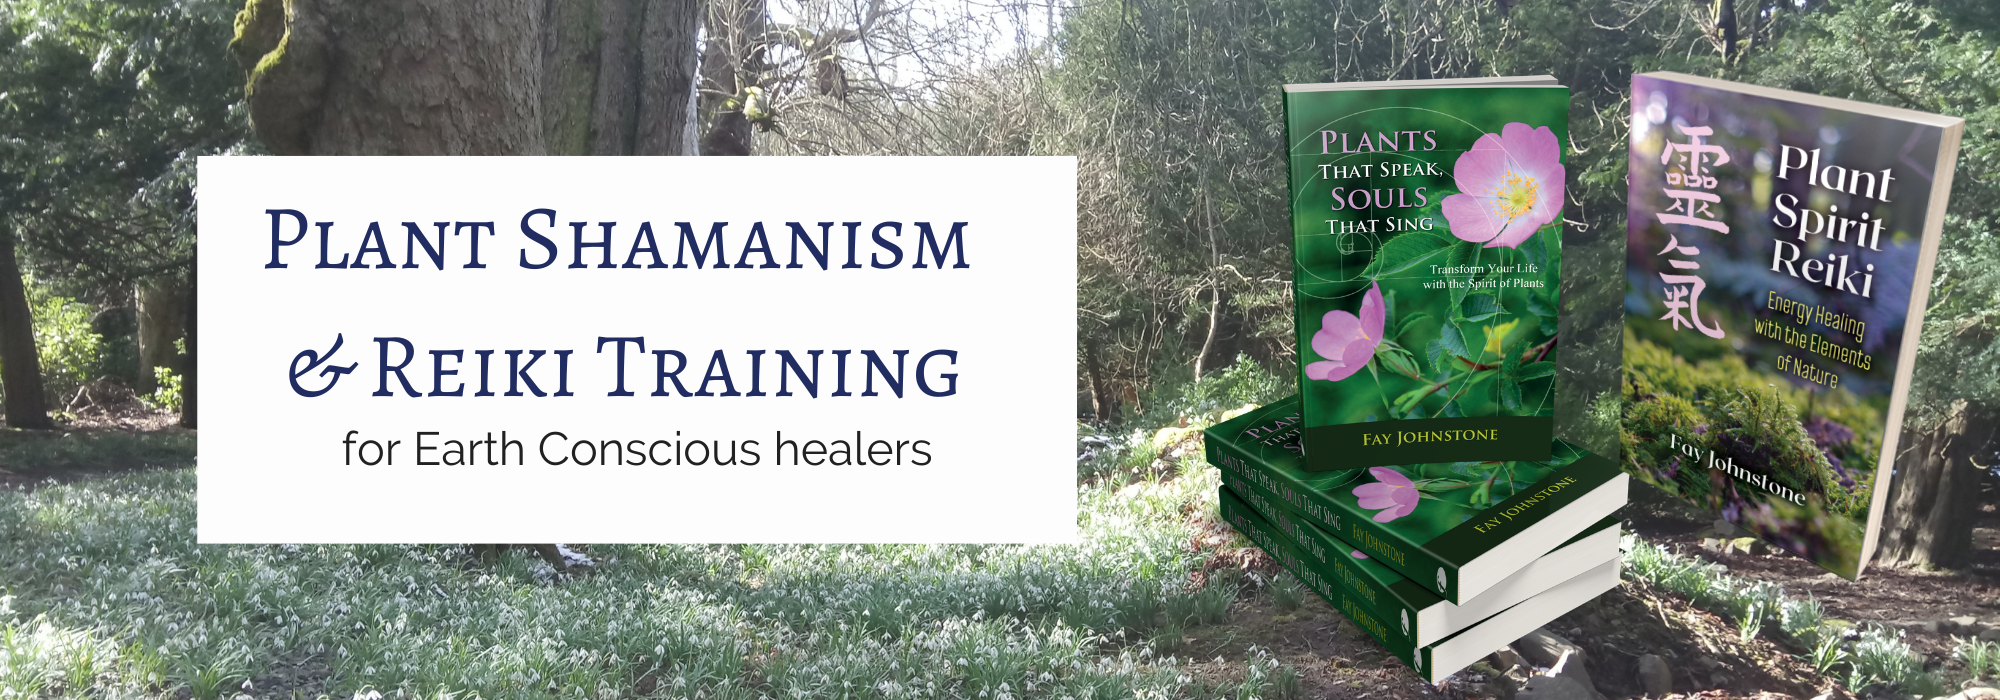 Plant Shamanism and Reiki Training with Fay Johnstone